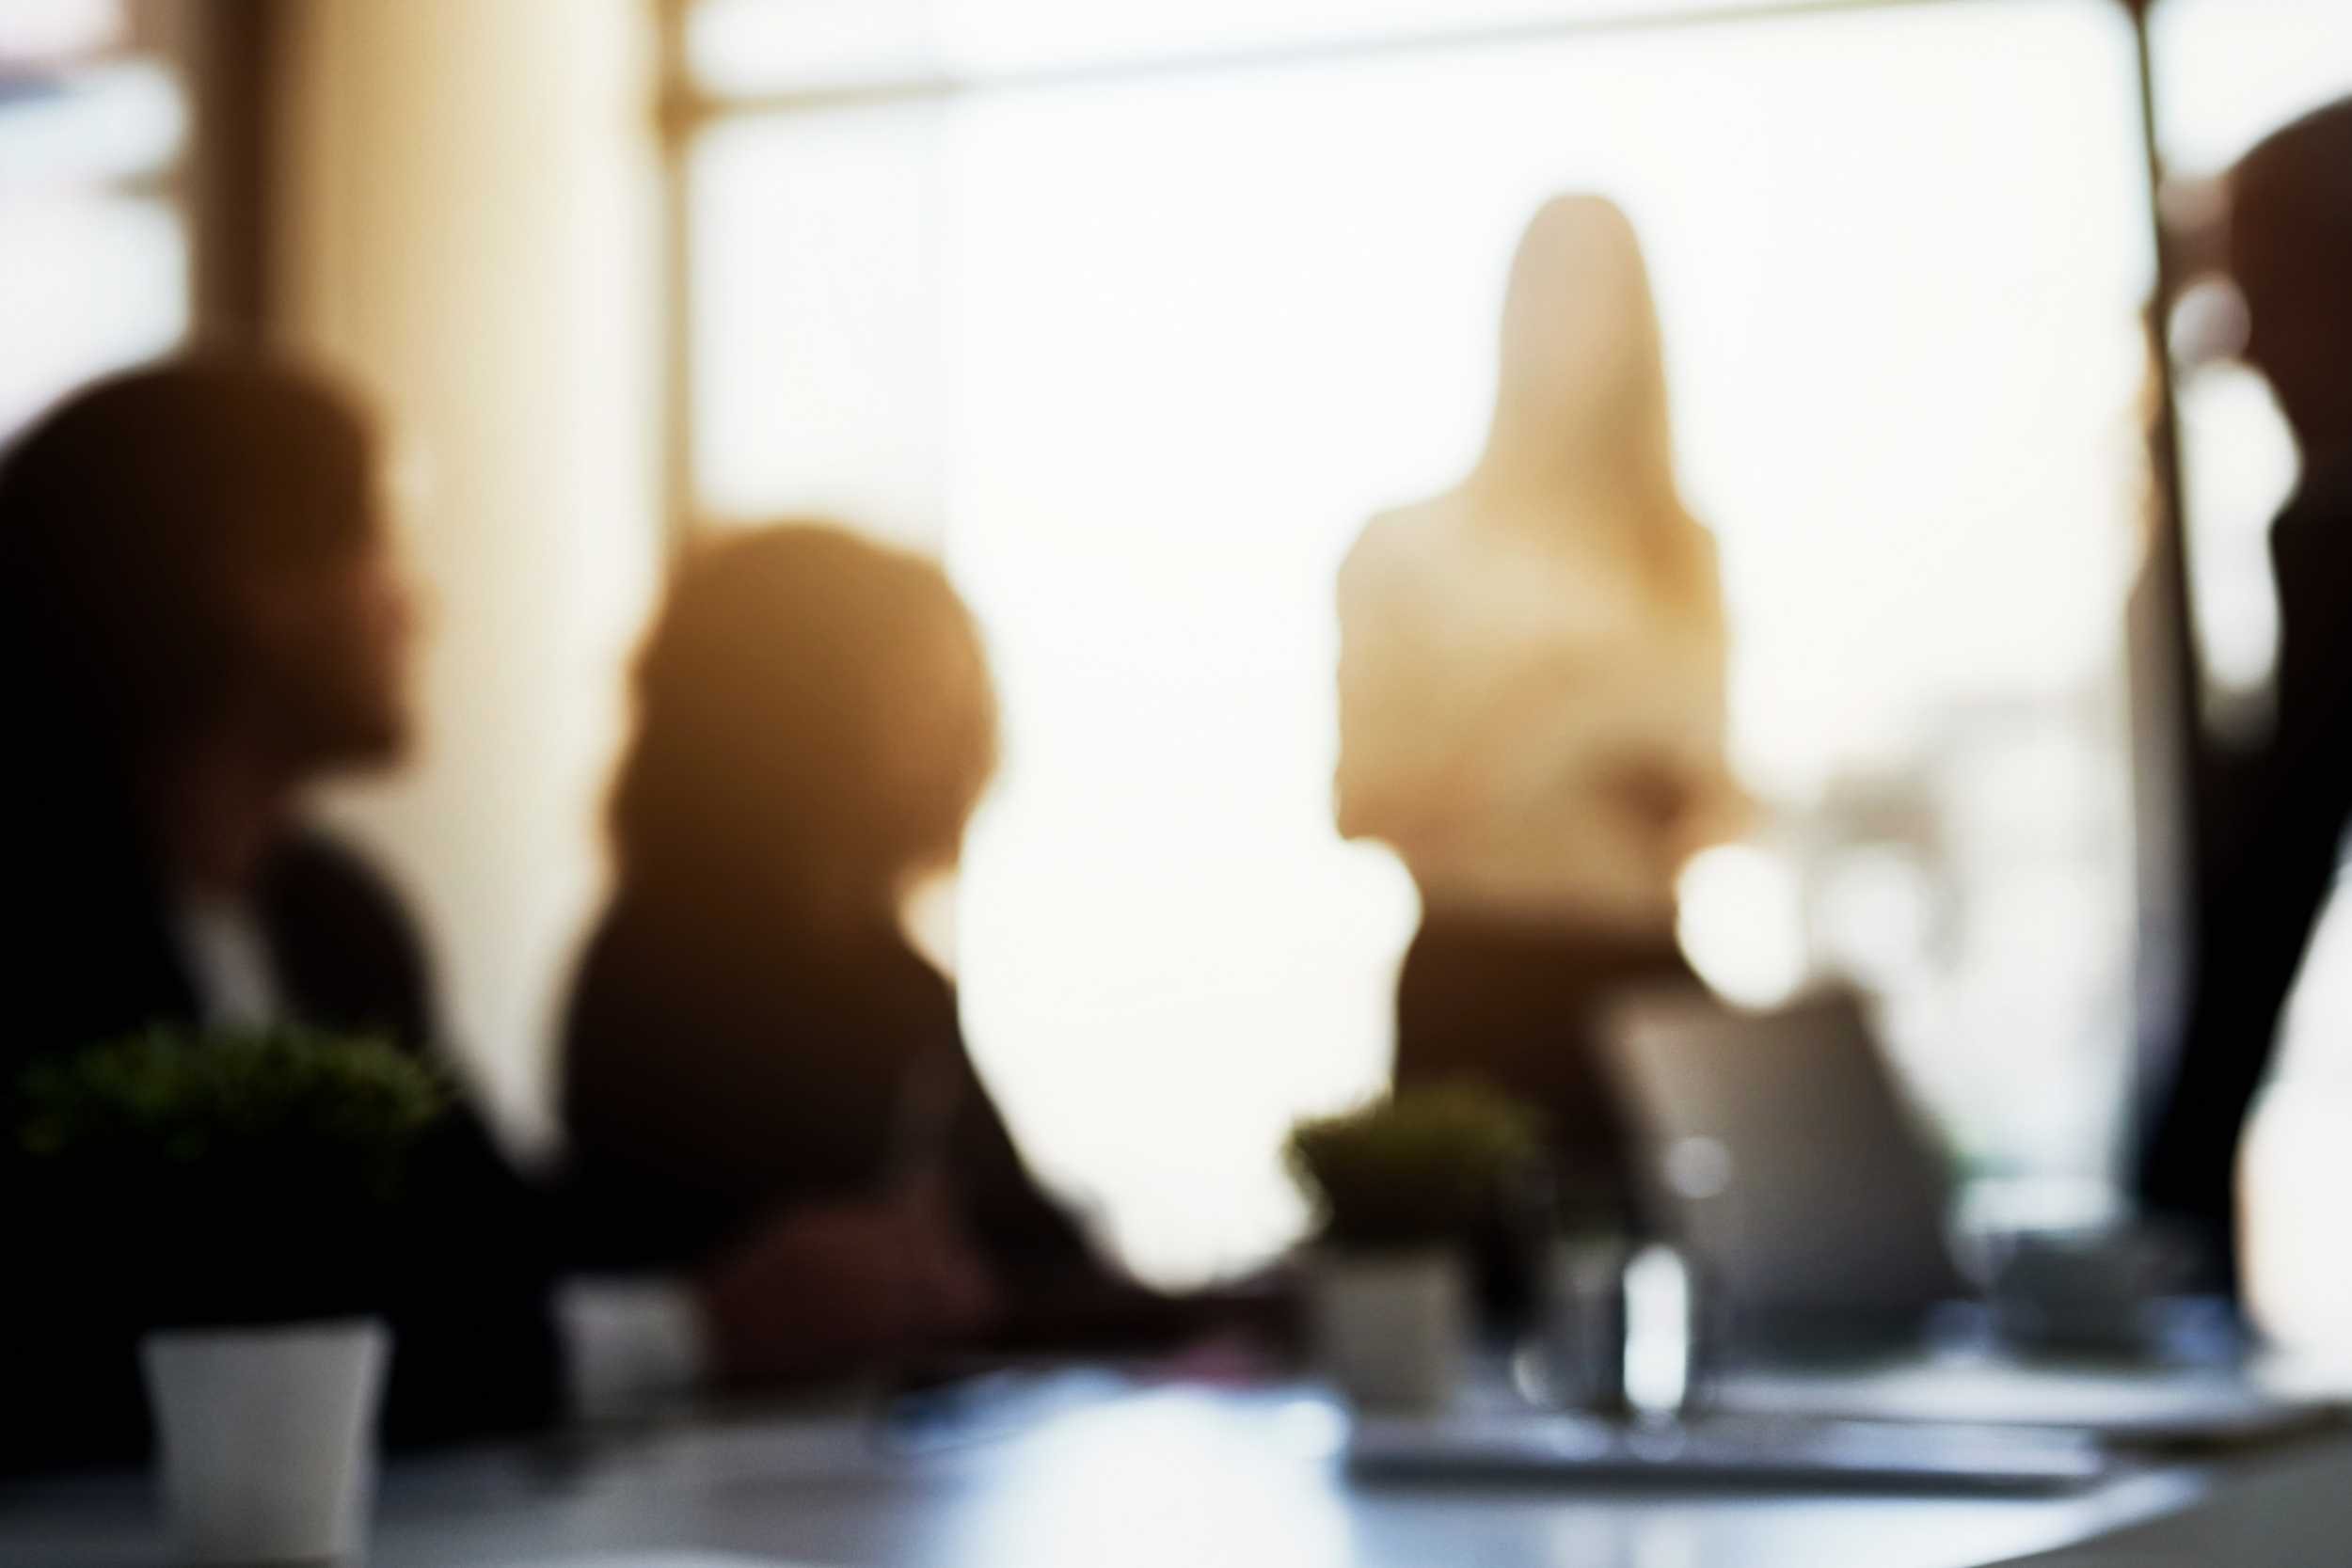 A photo of a HR Team is shown and not in focus. We can see the outline of people meeting with the backdrop of sunlight coming through the office window